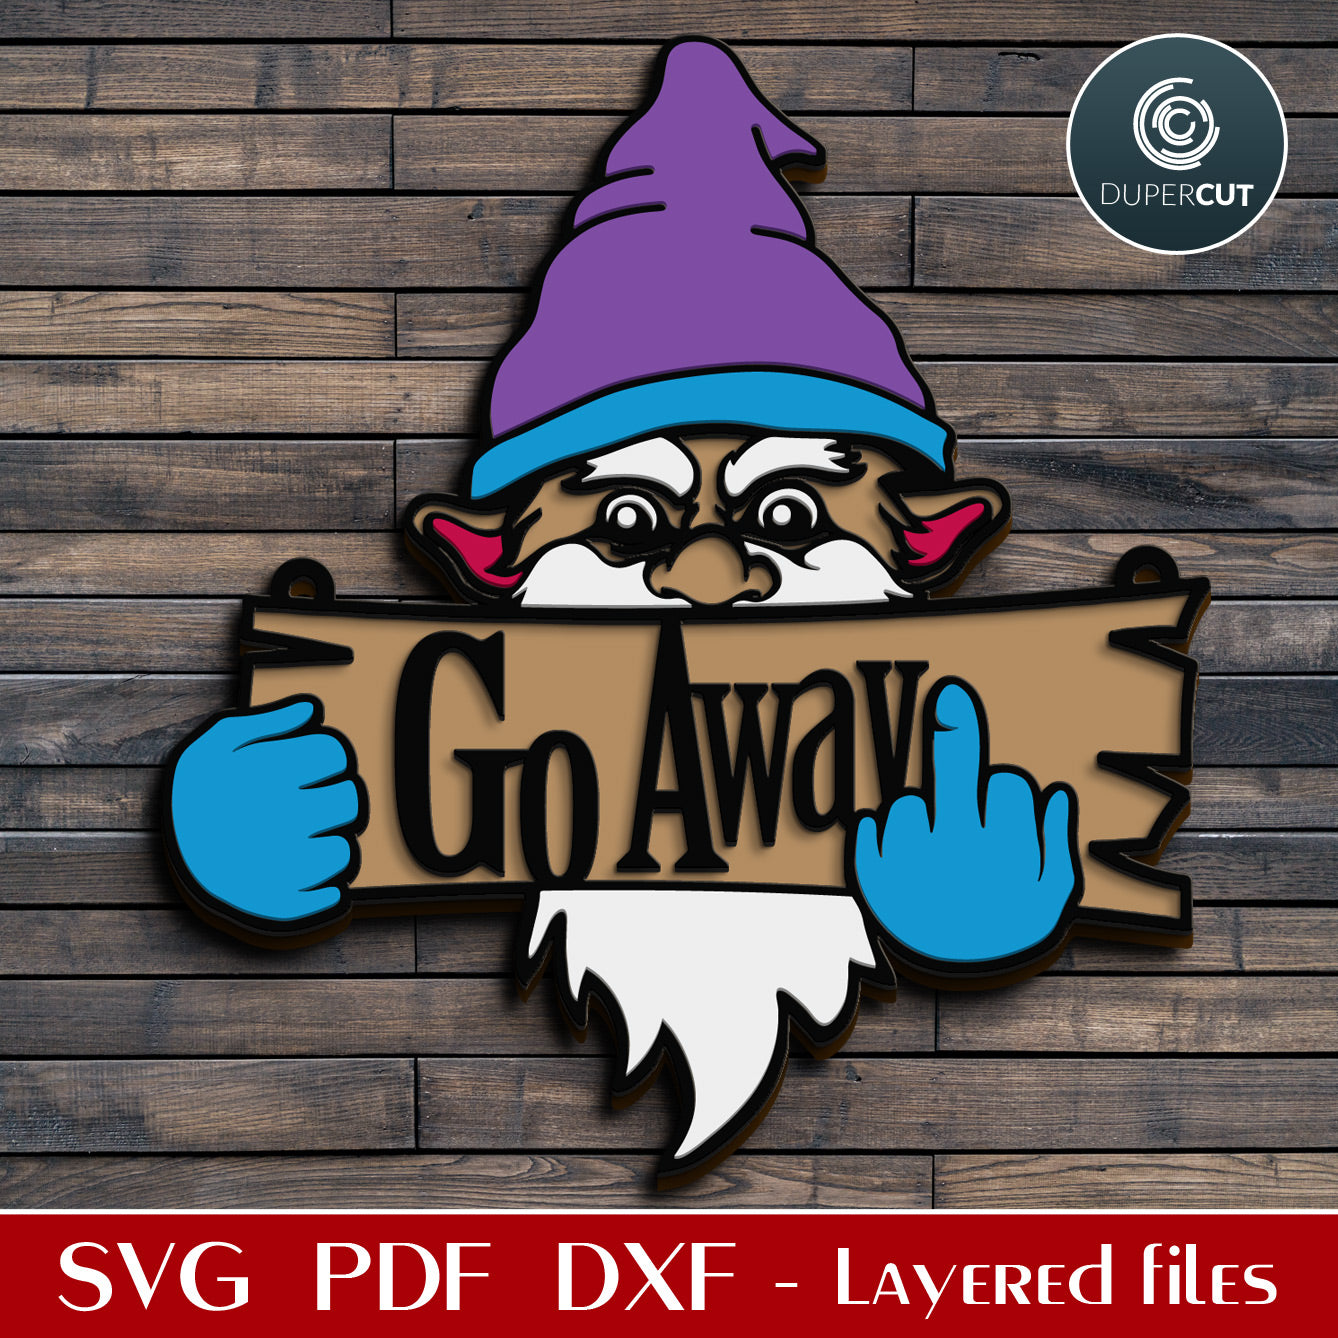 Go away yard sign - Angry gnome giving a finger door hanger, SVG DXF layered laser cutting files for Glowforge, Cricut, Xtool, CNC plasma machines, scroll saw pattern by www.DuperCut.com